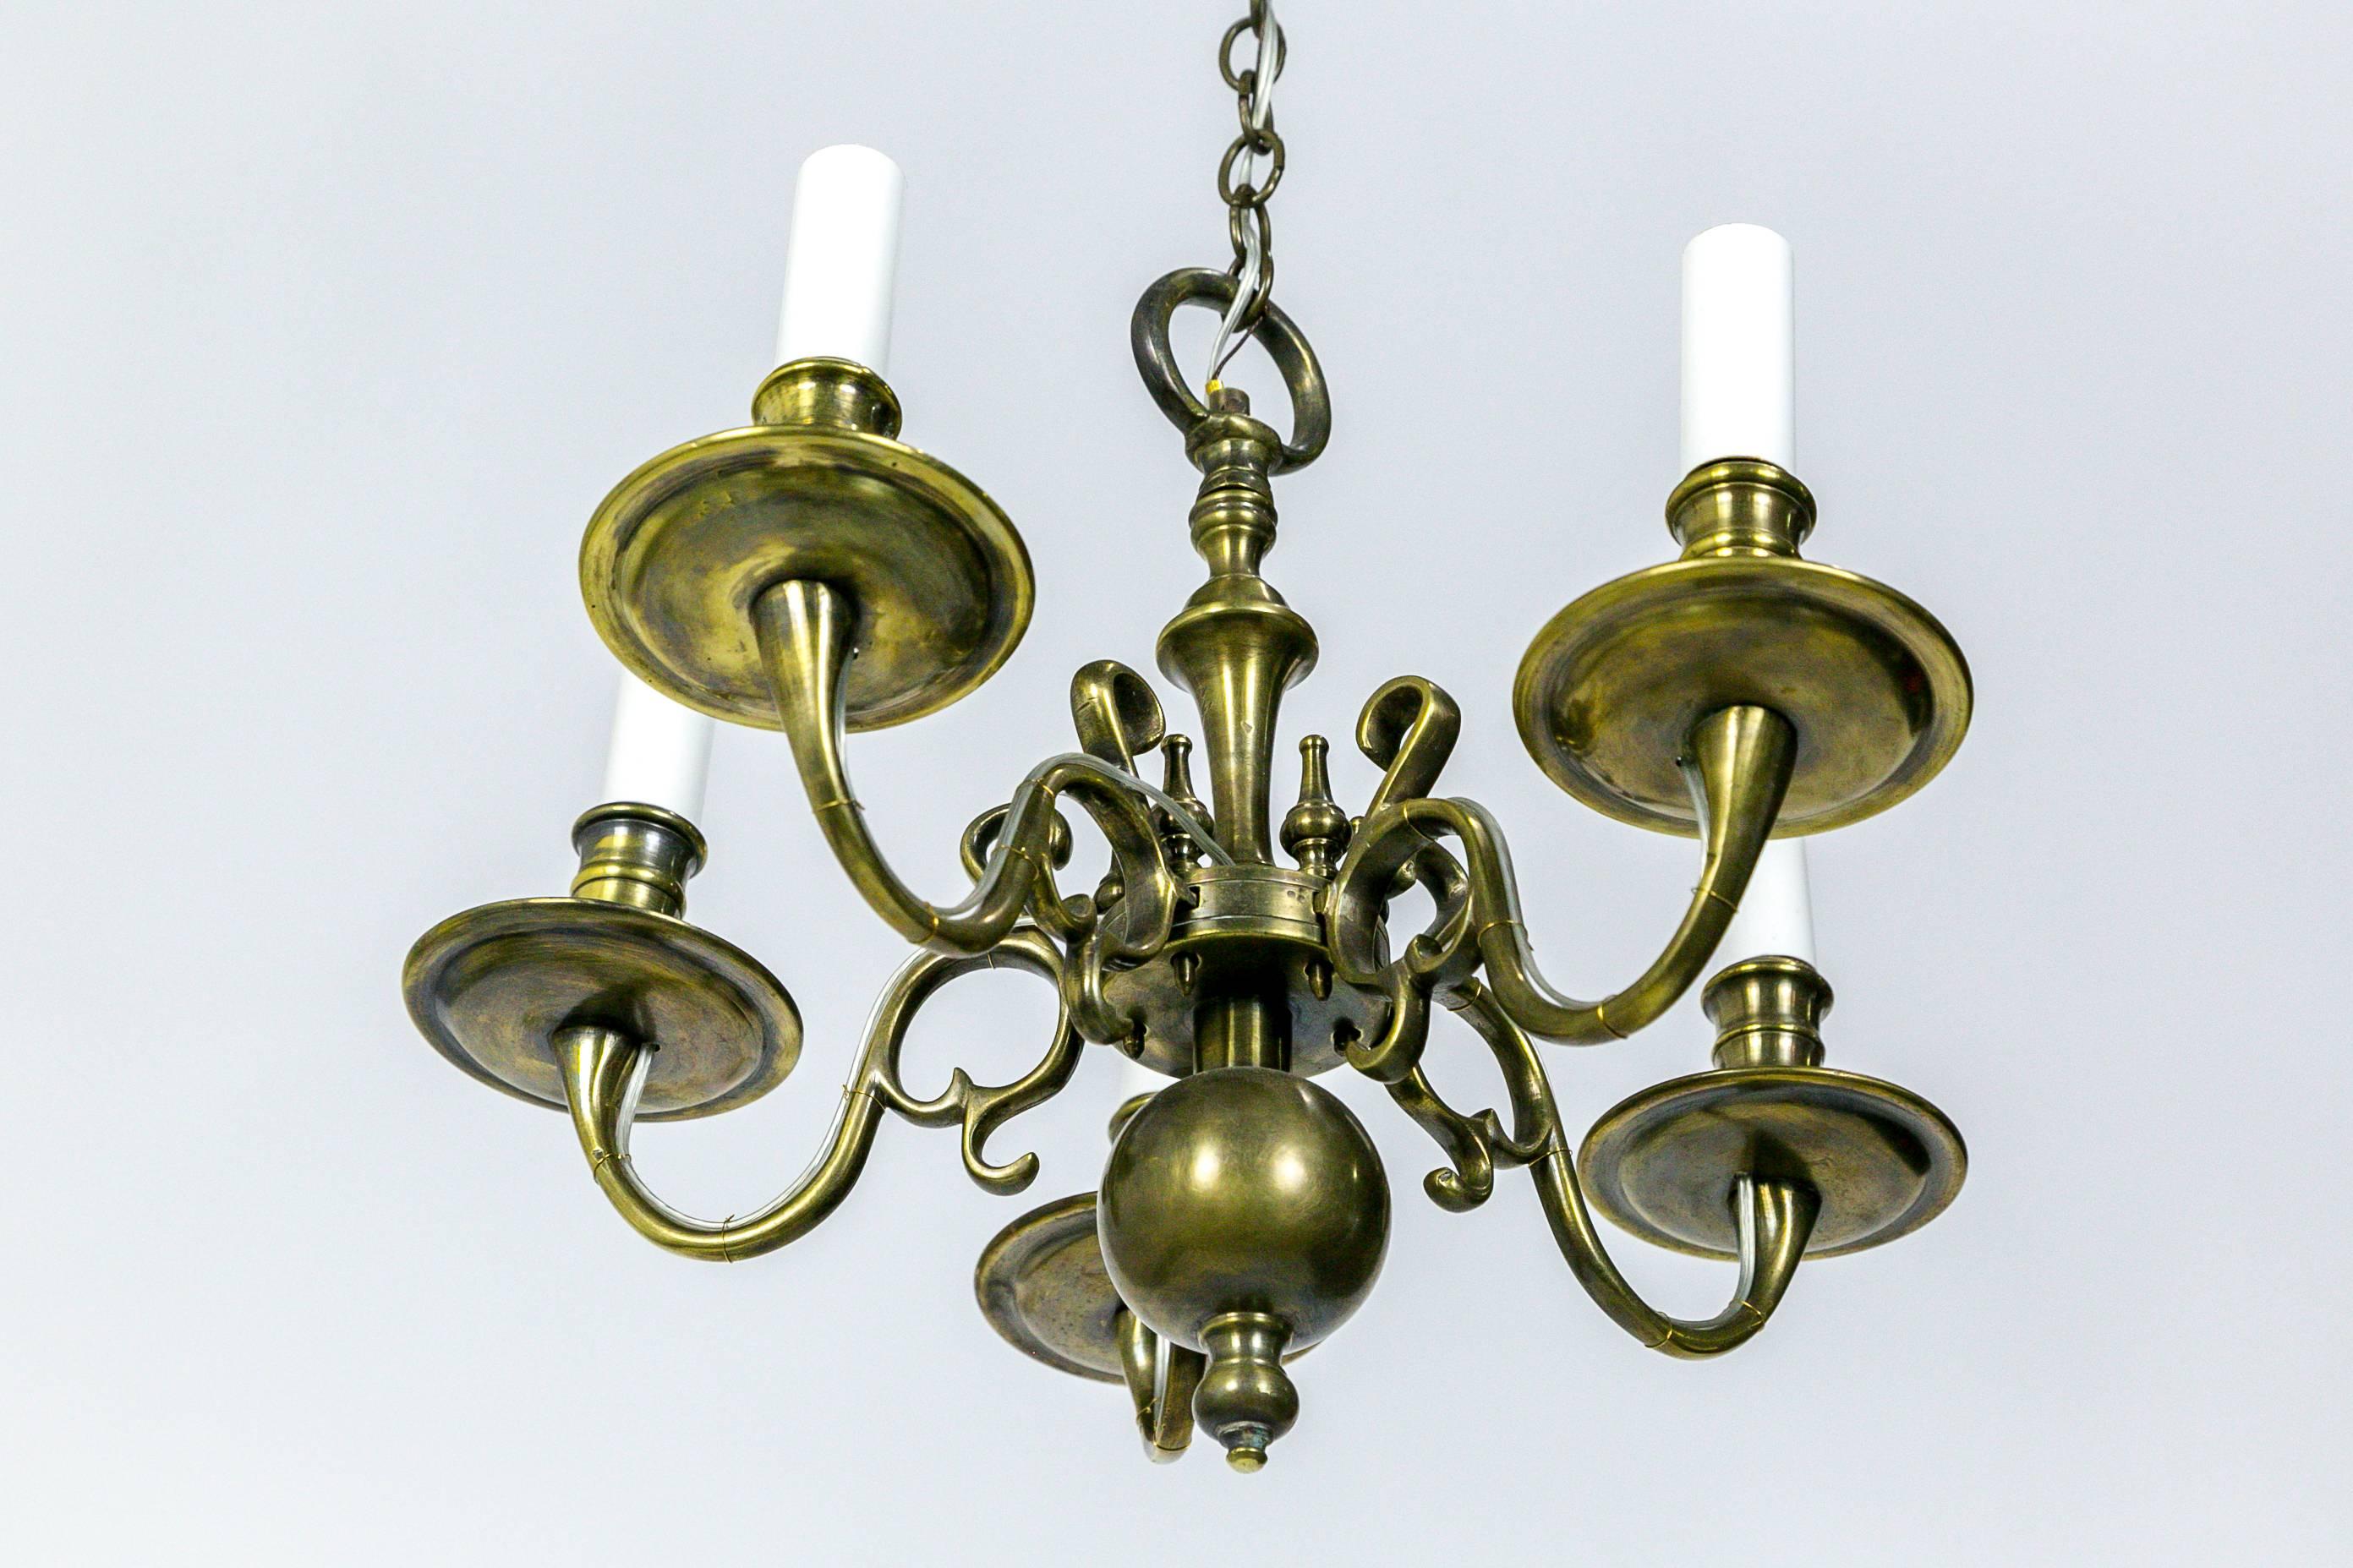 This finest of Colonial Williamsburg brass chandeliers is delicate in size and versatile for many areas of a home to display an intimate, refined feel. It has 5 lights and is newly rewired. Gorgeous finish, excellent condition. Original chain and